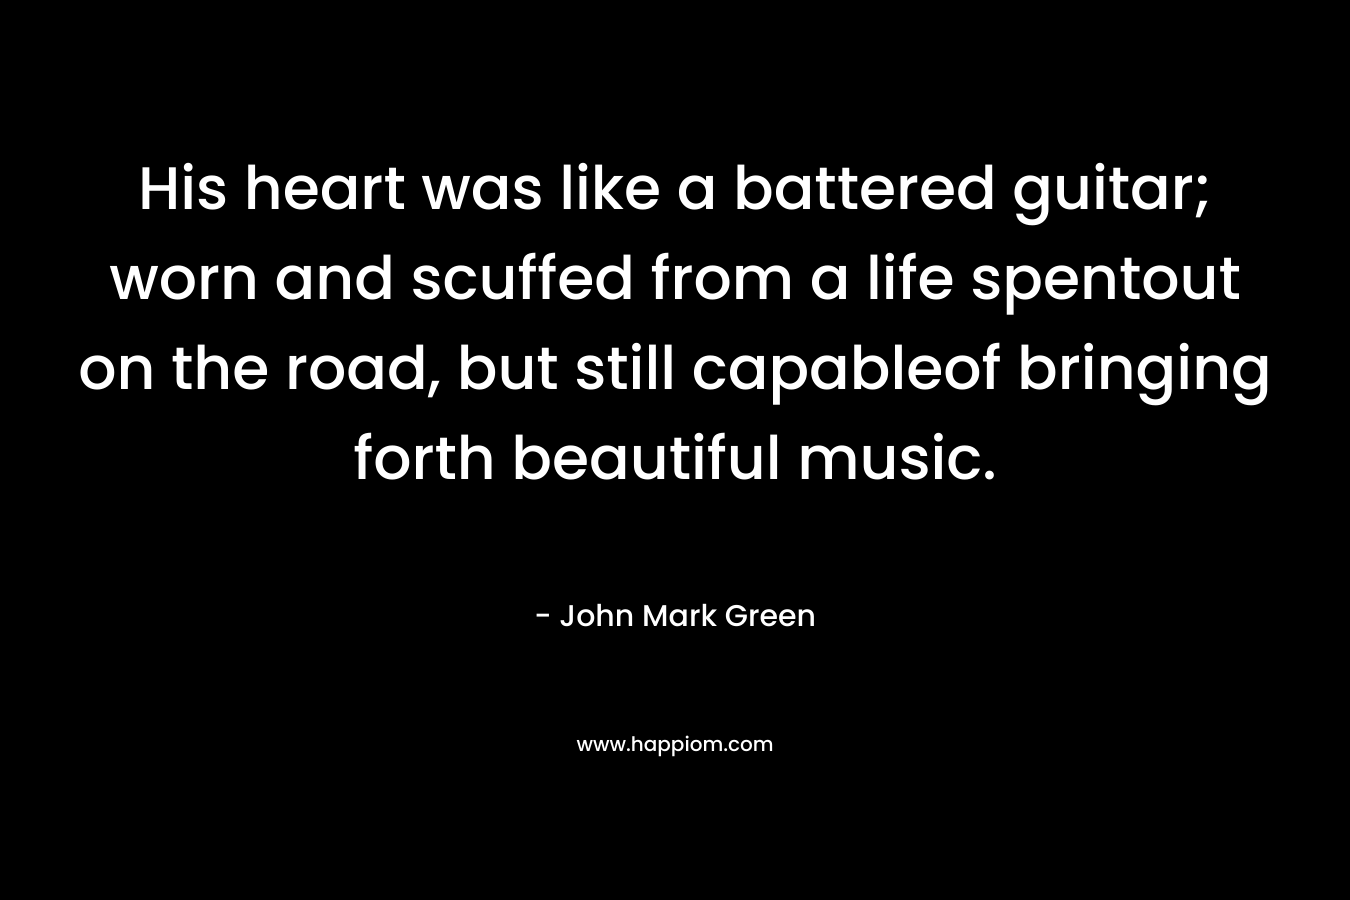 His heart was like a battered guitar; worn and scuffed from a life spentout on the road, but still capableof bringing forth beautiful music. – John Mark Green